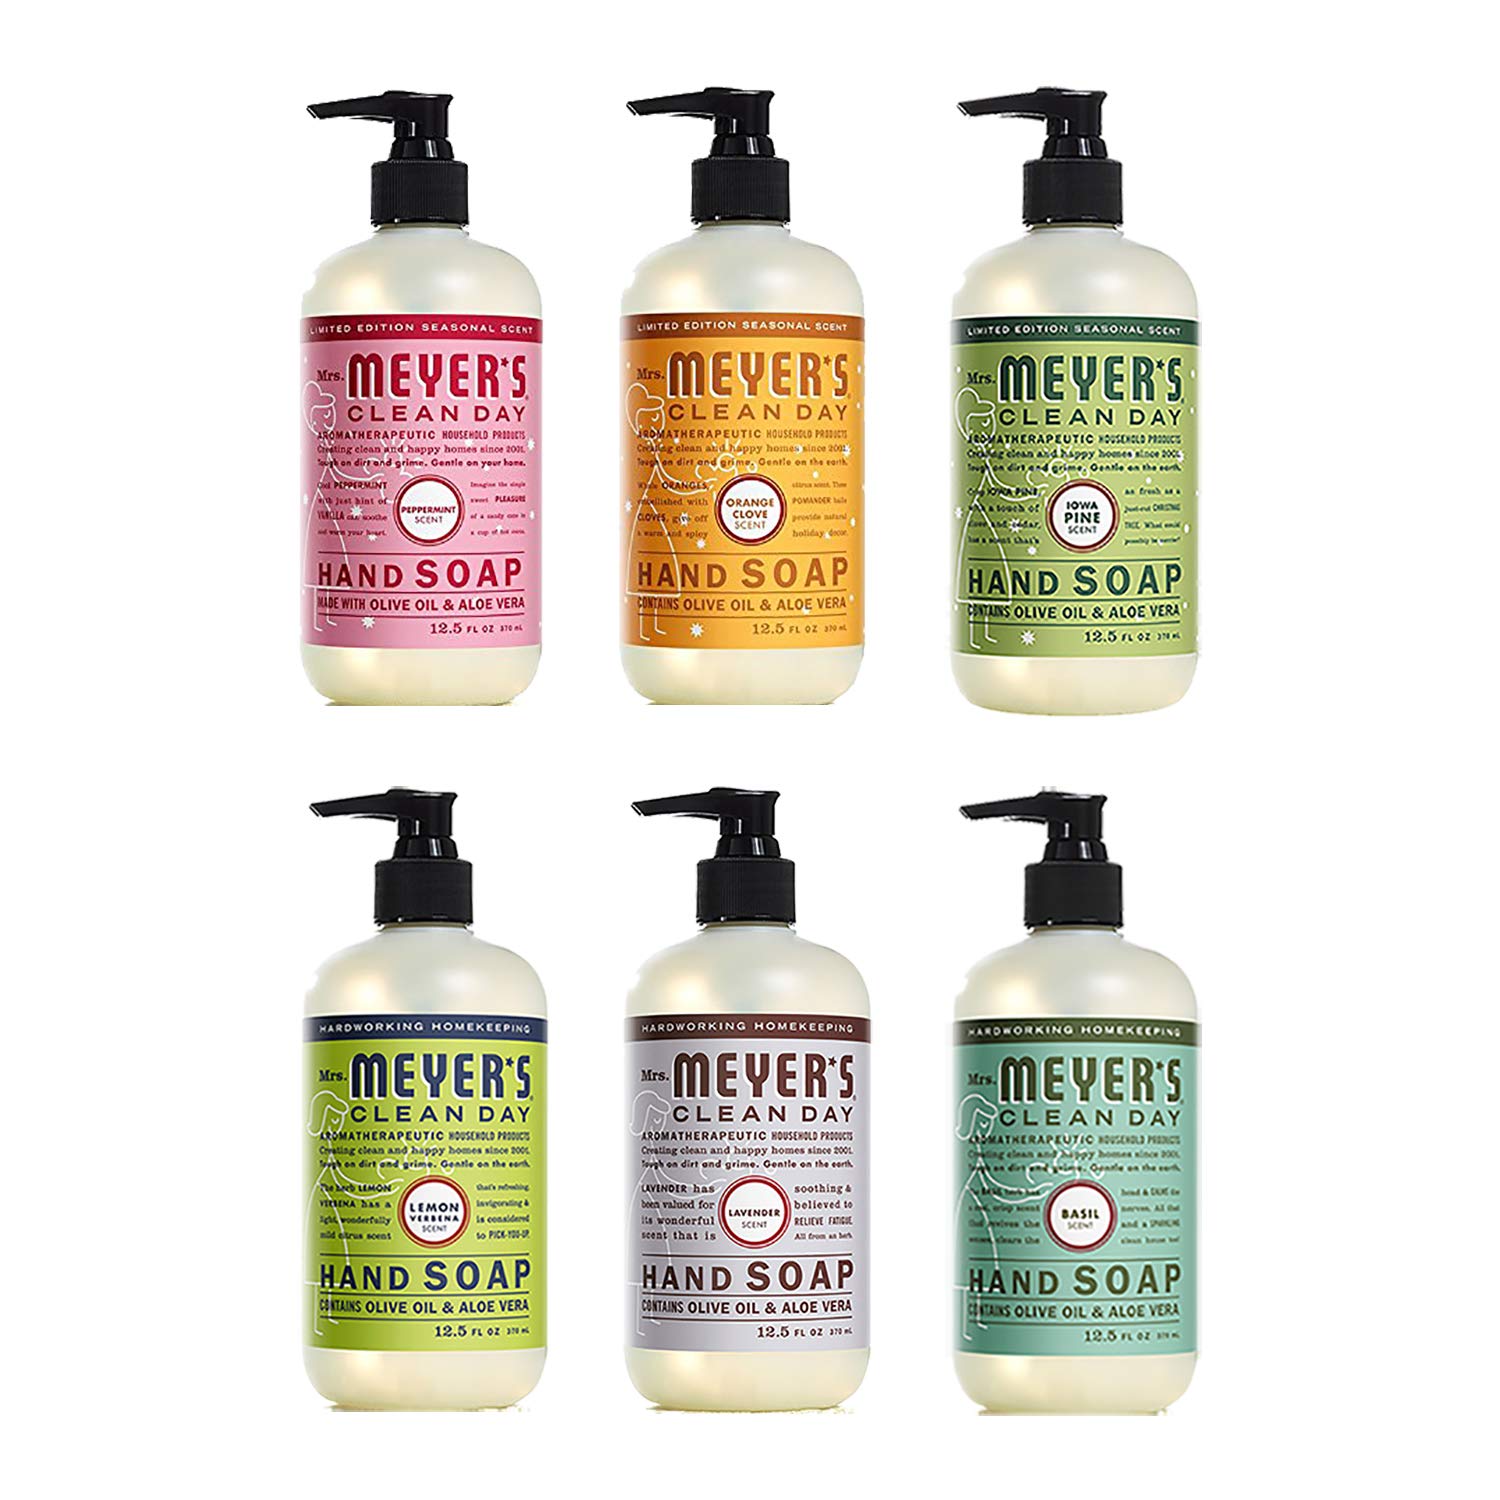 Mrs. Meyer's Liquid Hand Soap Holiday Scents Plus Everyday Scents 6 Scent Variety Pack, 1 Iowa Pine, 1 Orange Clove, 1 Peppermint, 1 Basil, 1